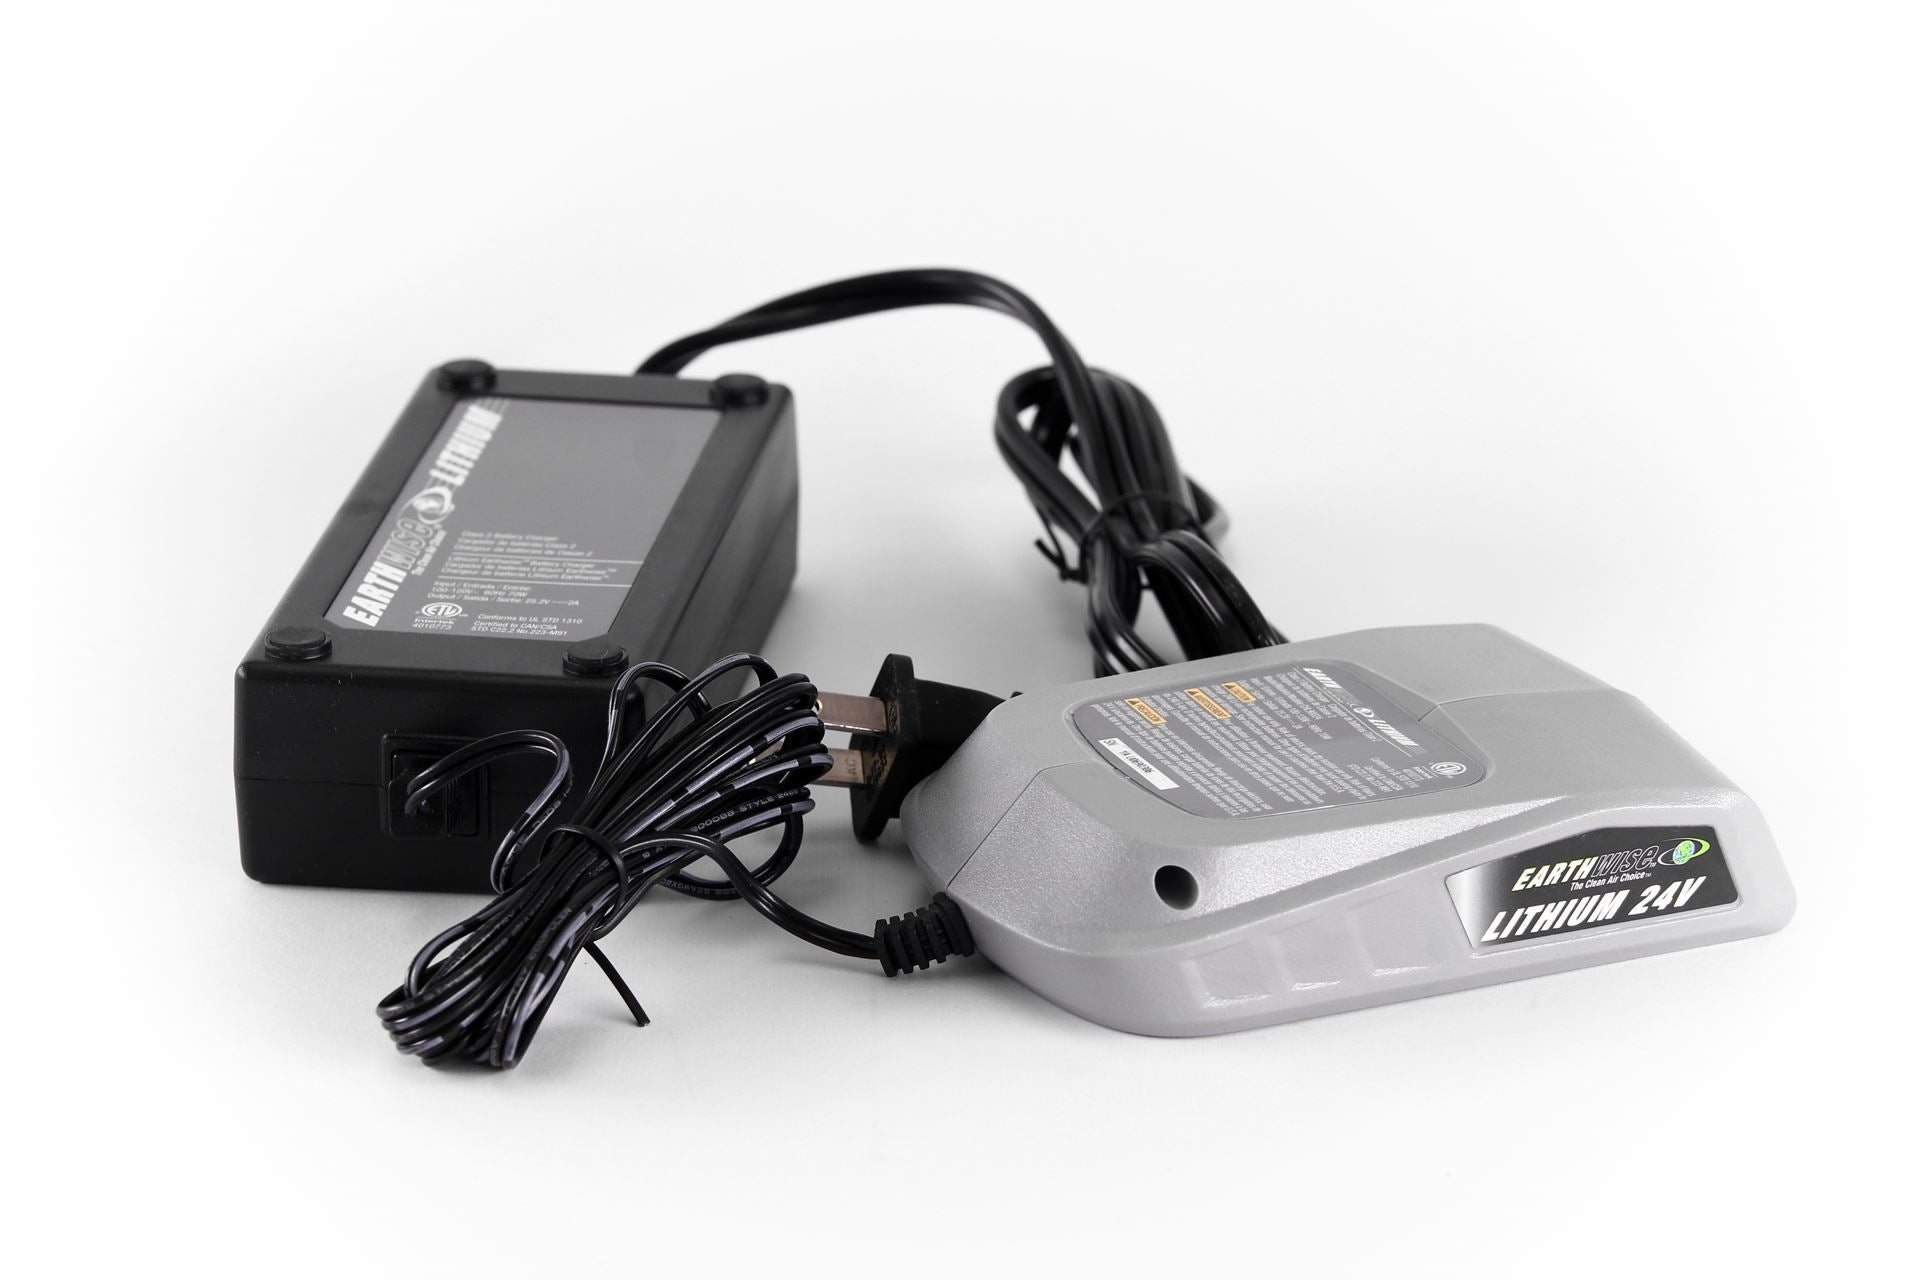 Earthwise 24V Lithium Battery Charger